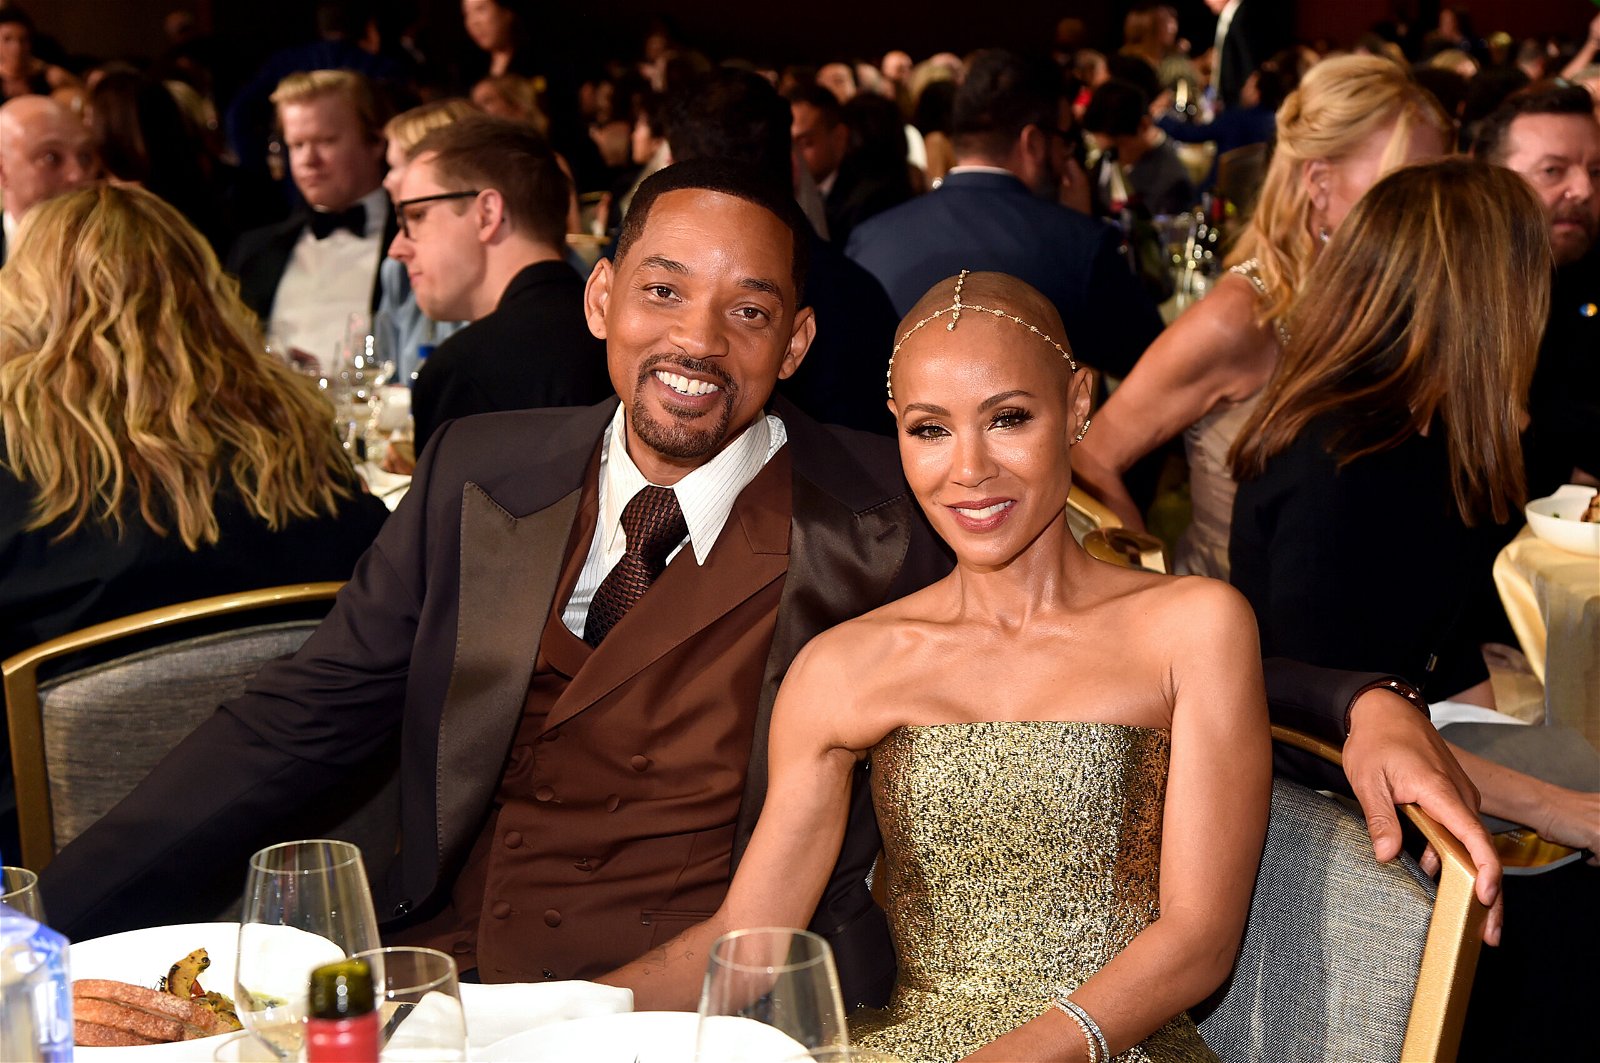 Will Smith and Jada Pinkett Smith join hands with Williams sisters.